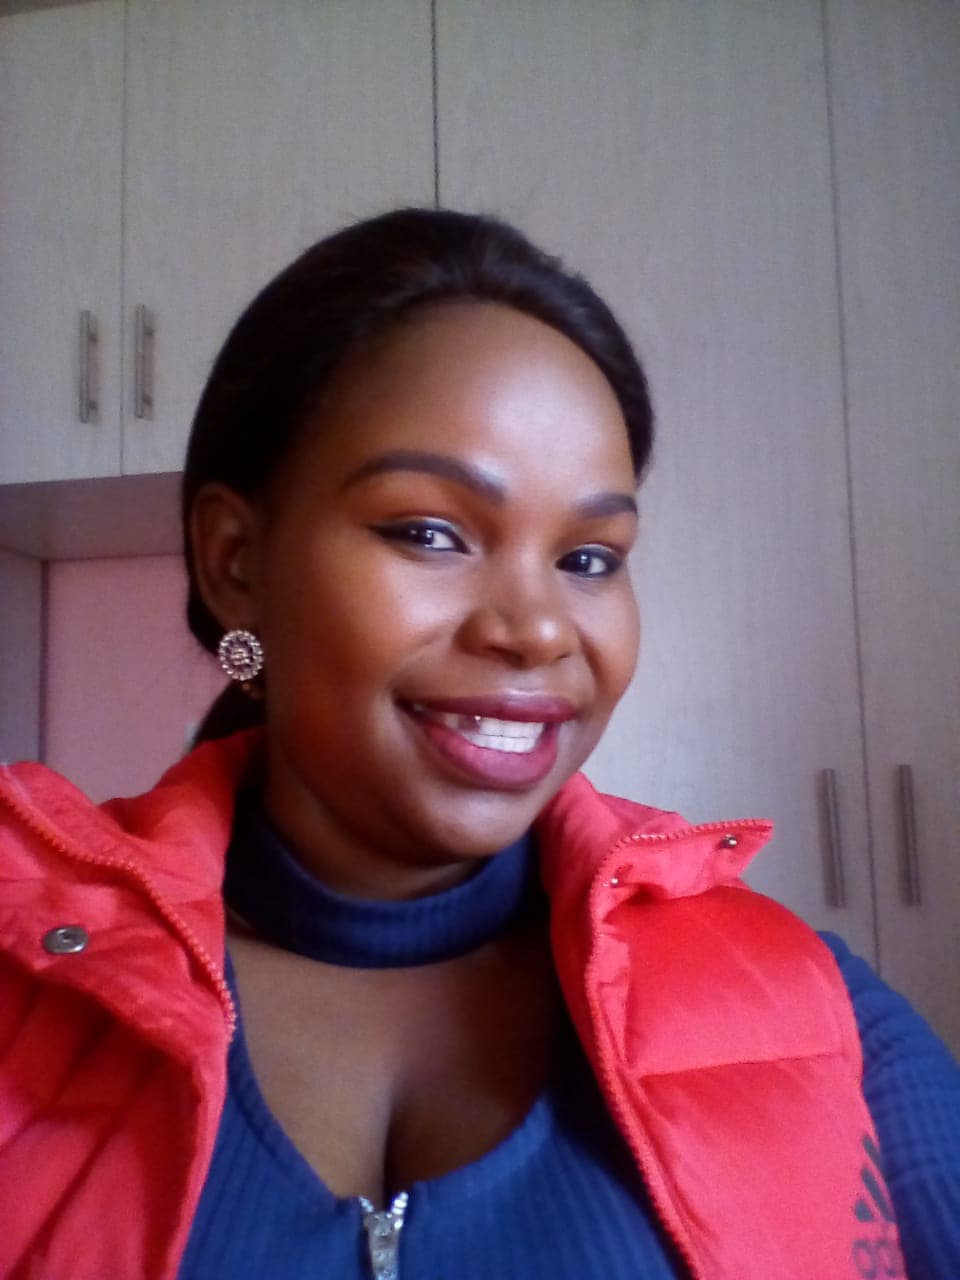 Search for kidnapped woman in Osindisweni